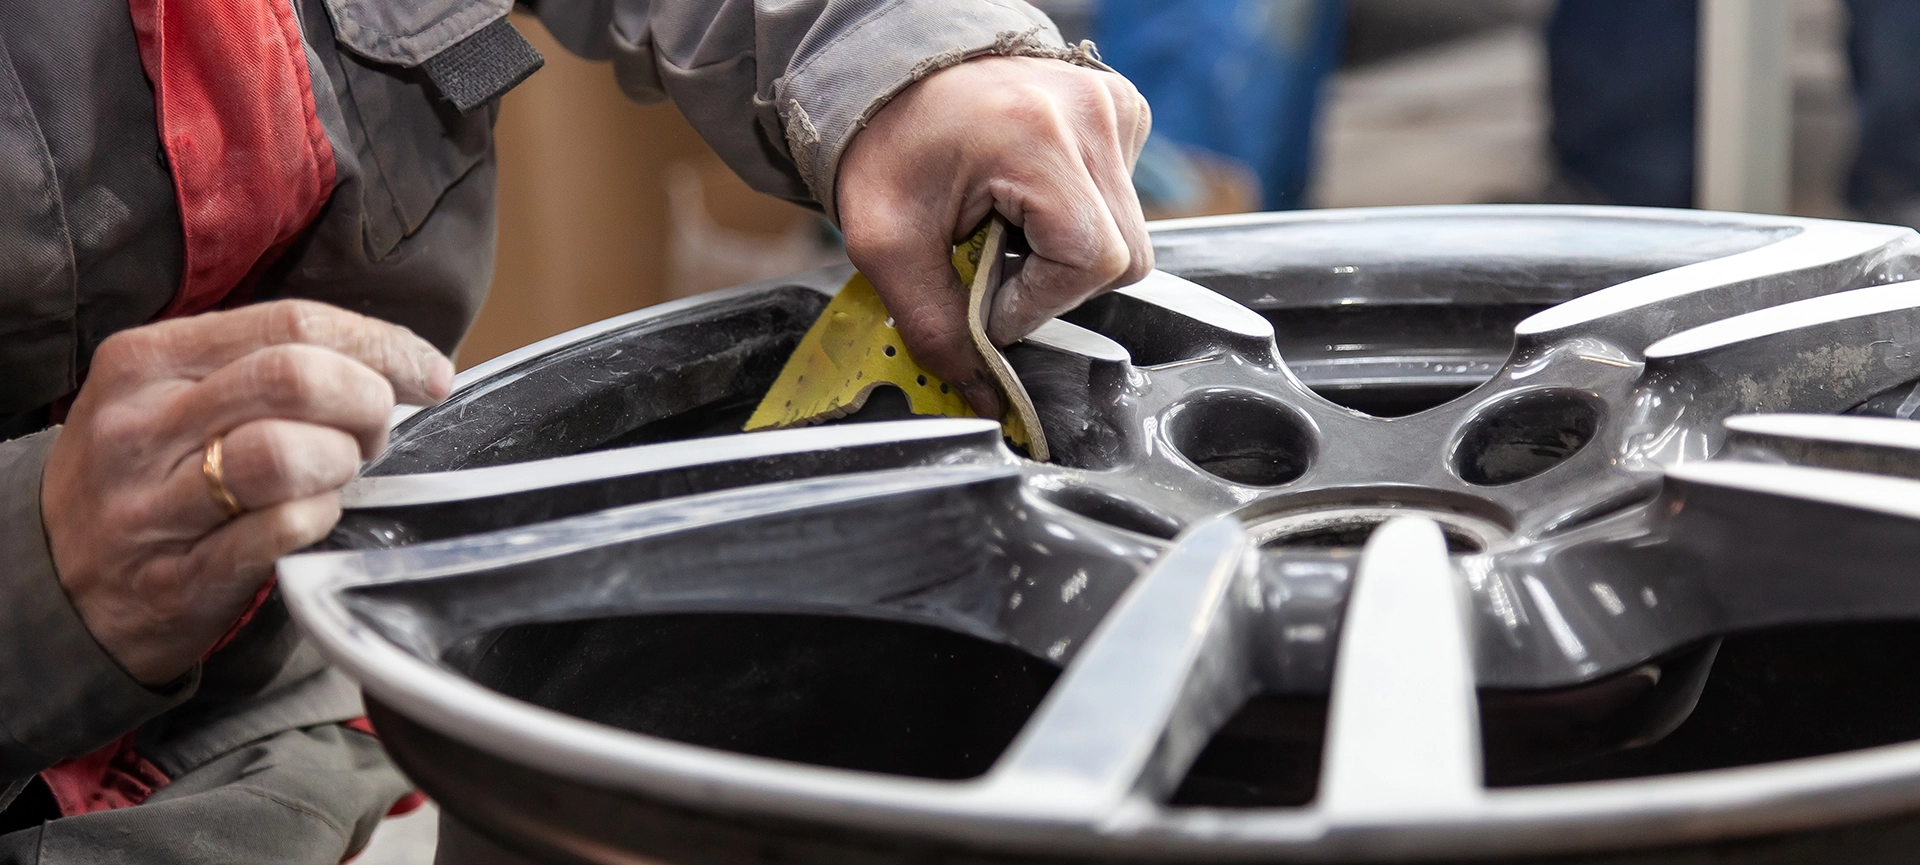 How to Choose a Reliable and Professional Rim Repair Service?